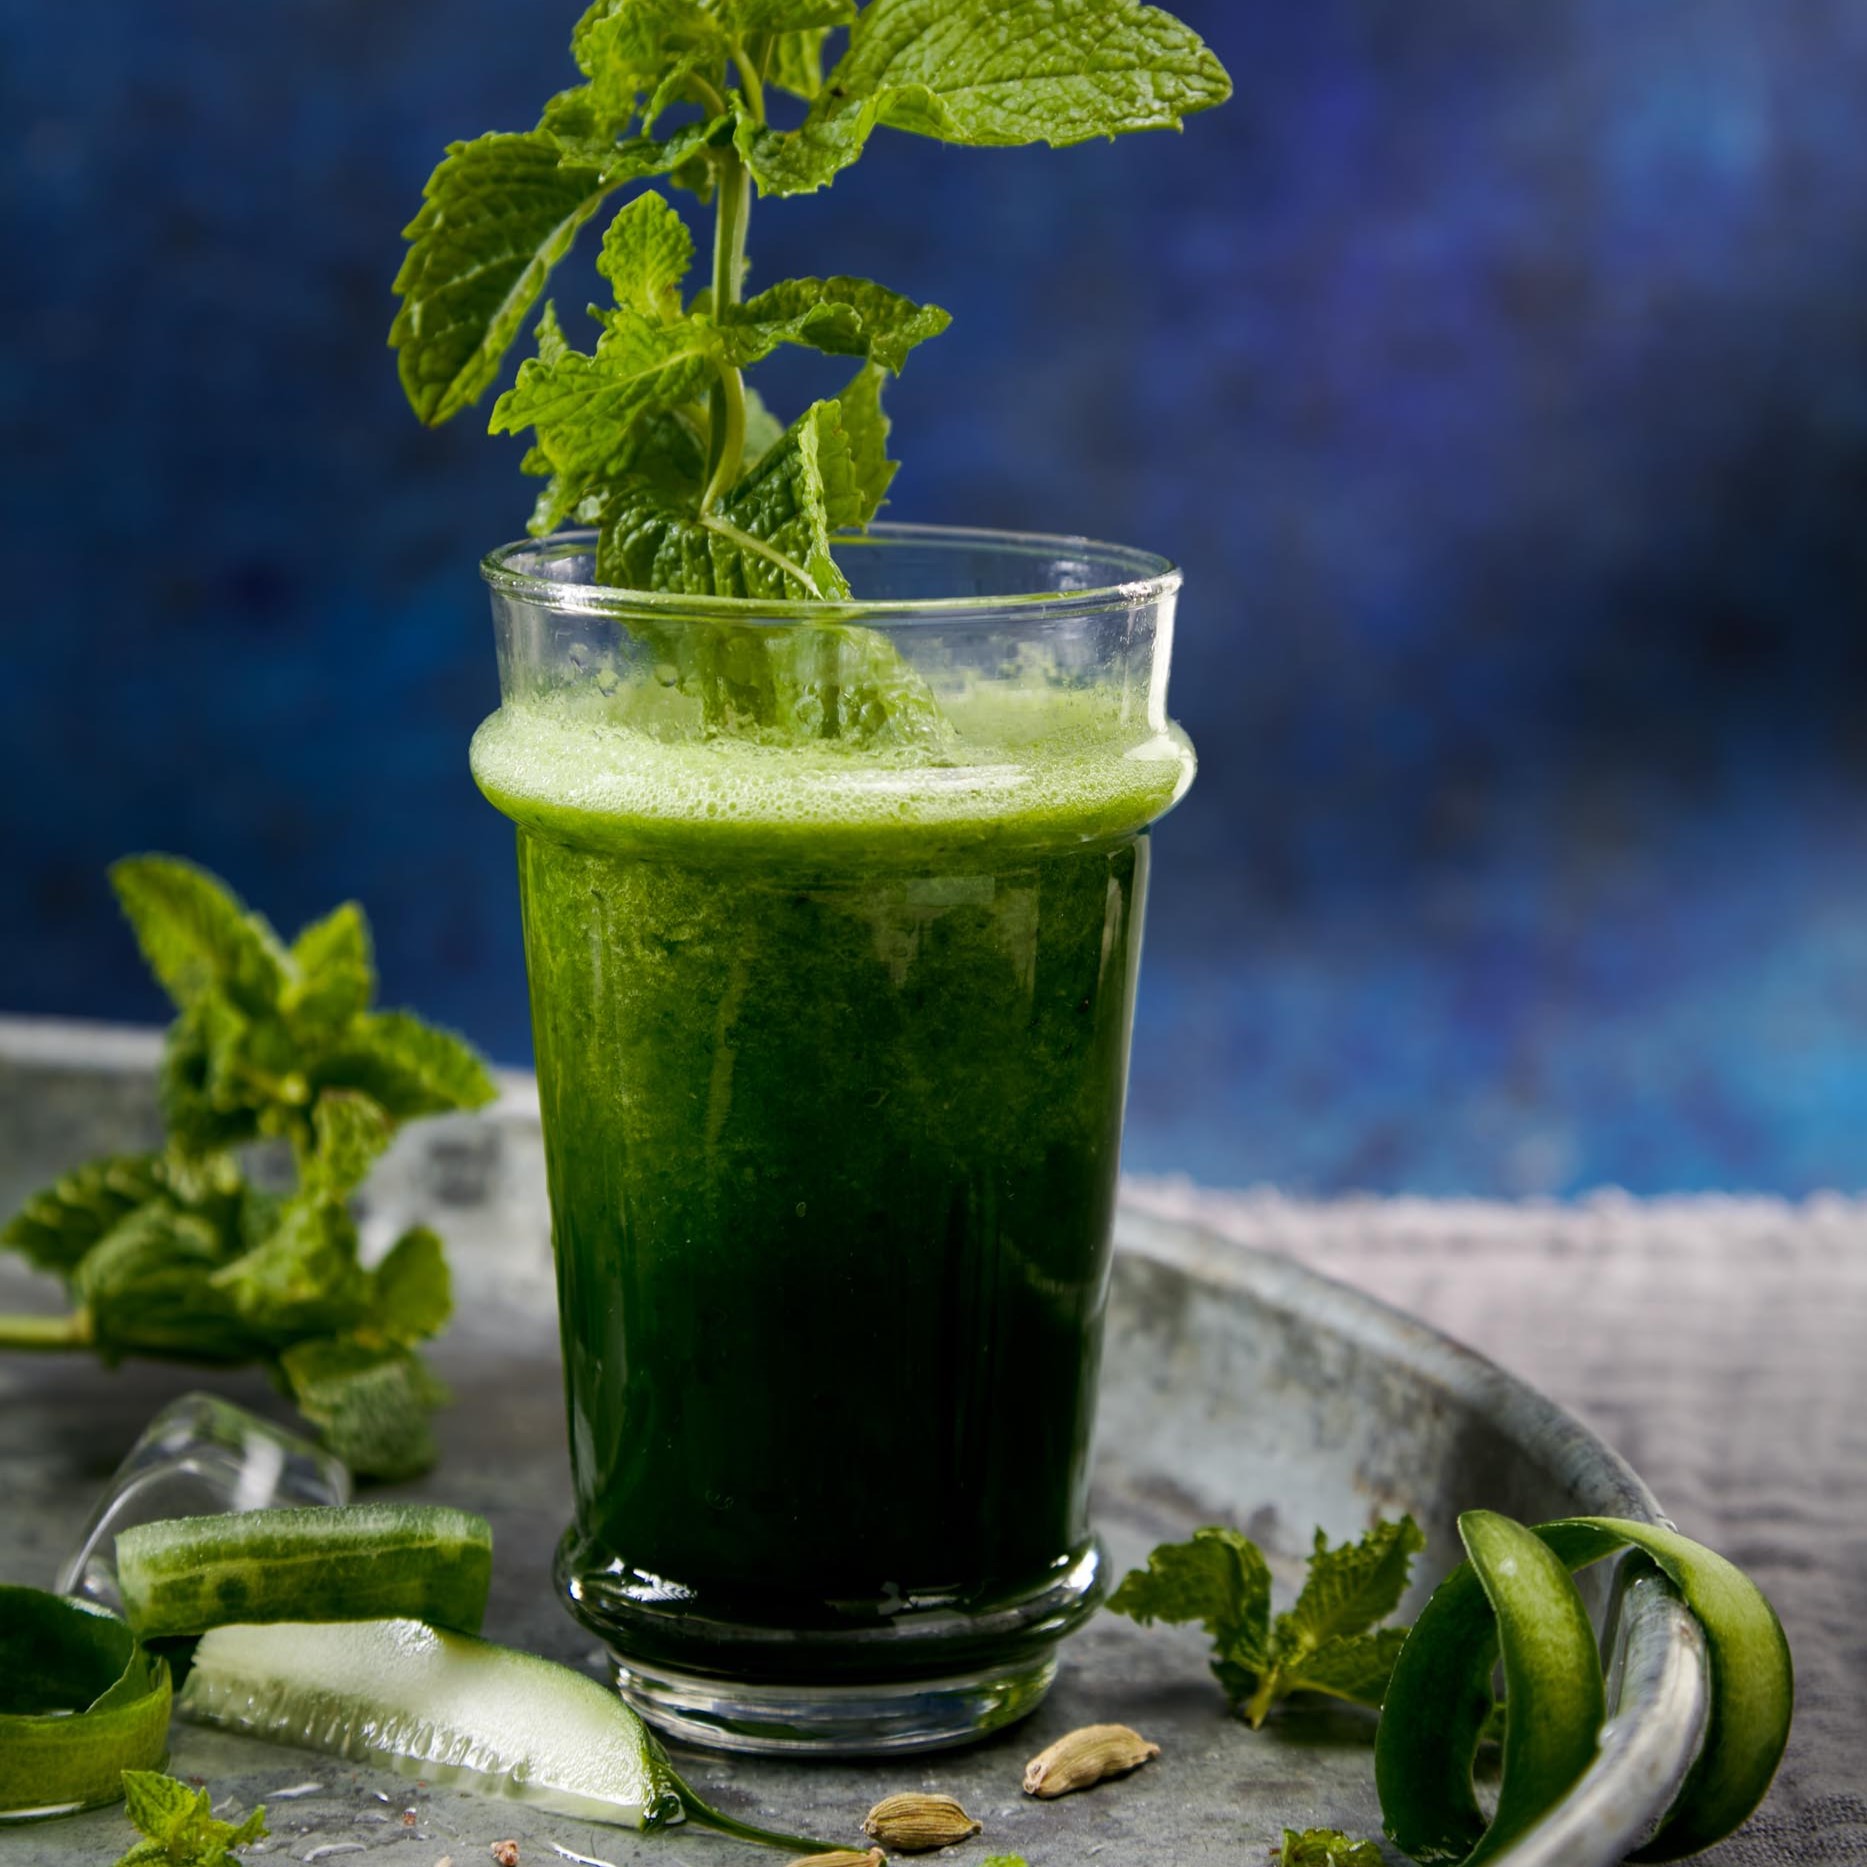 The Cucumber Juice With Natural Mint